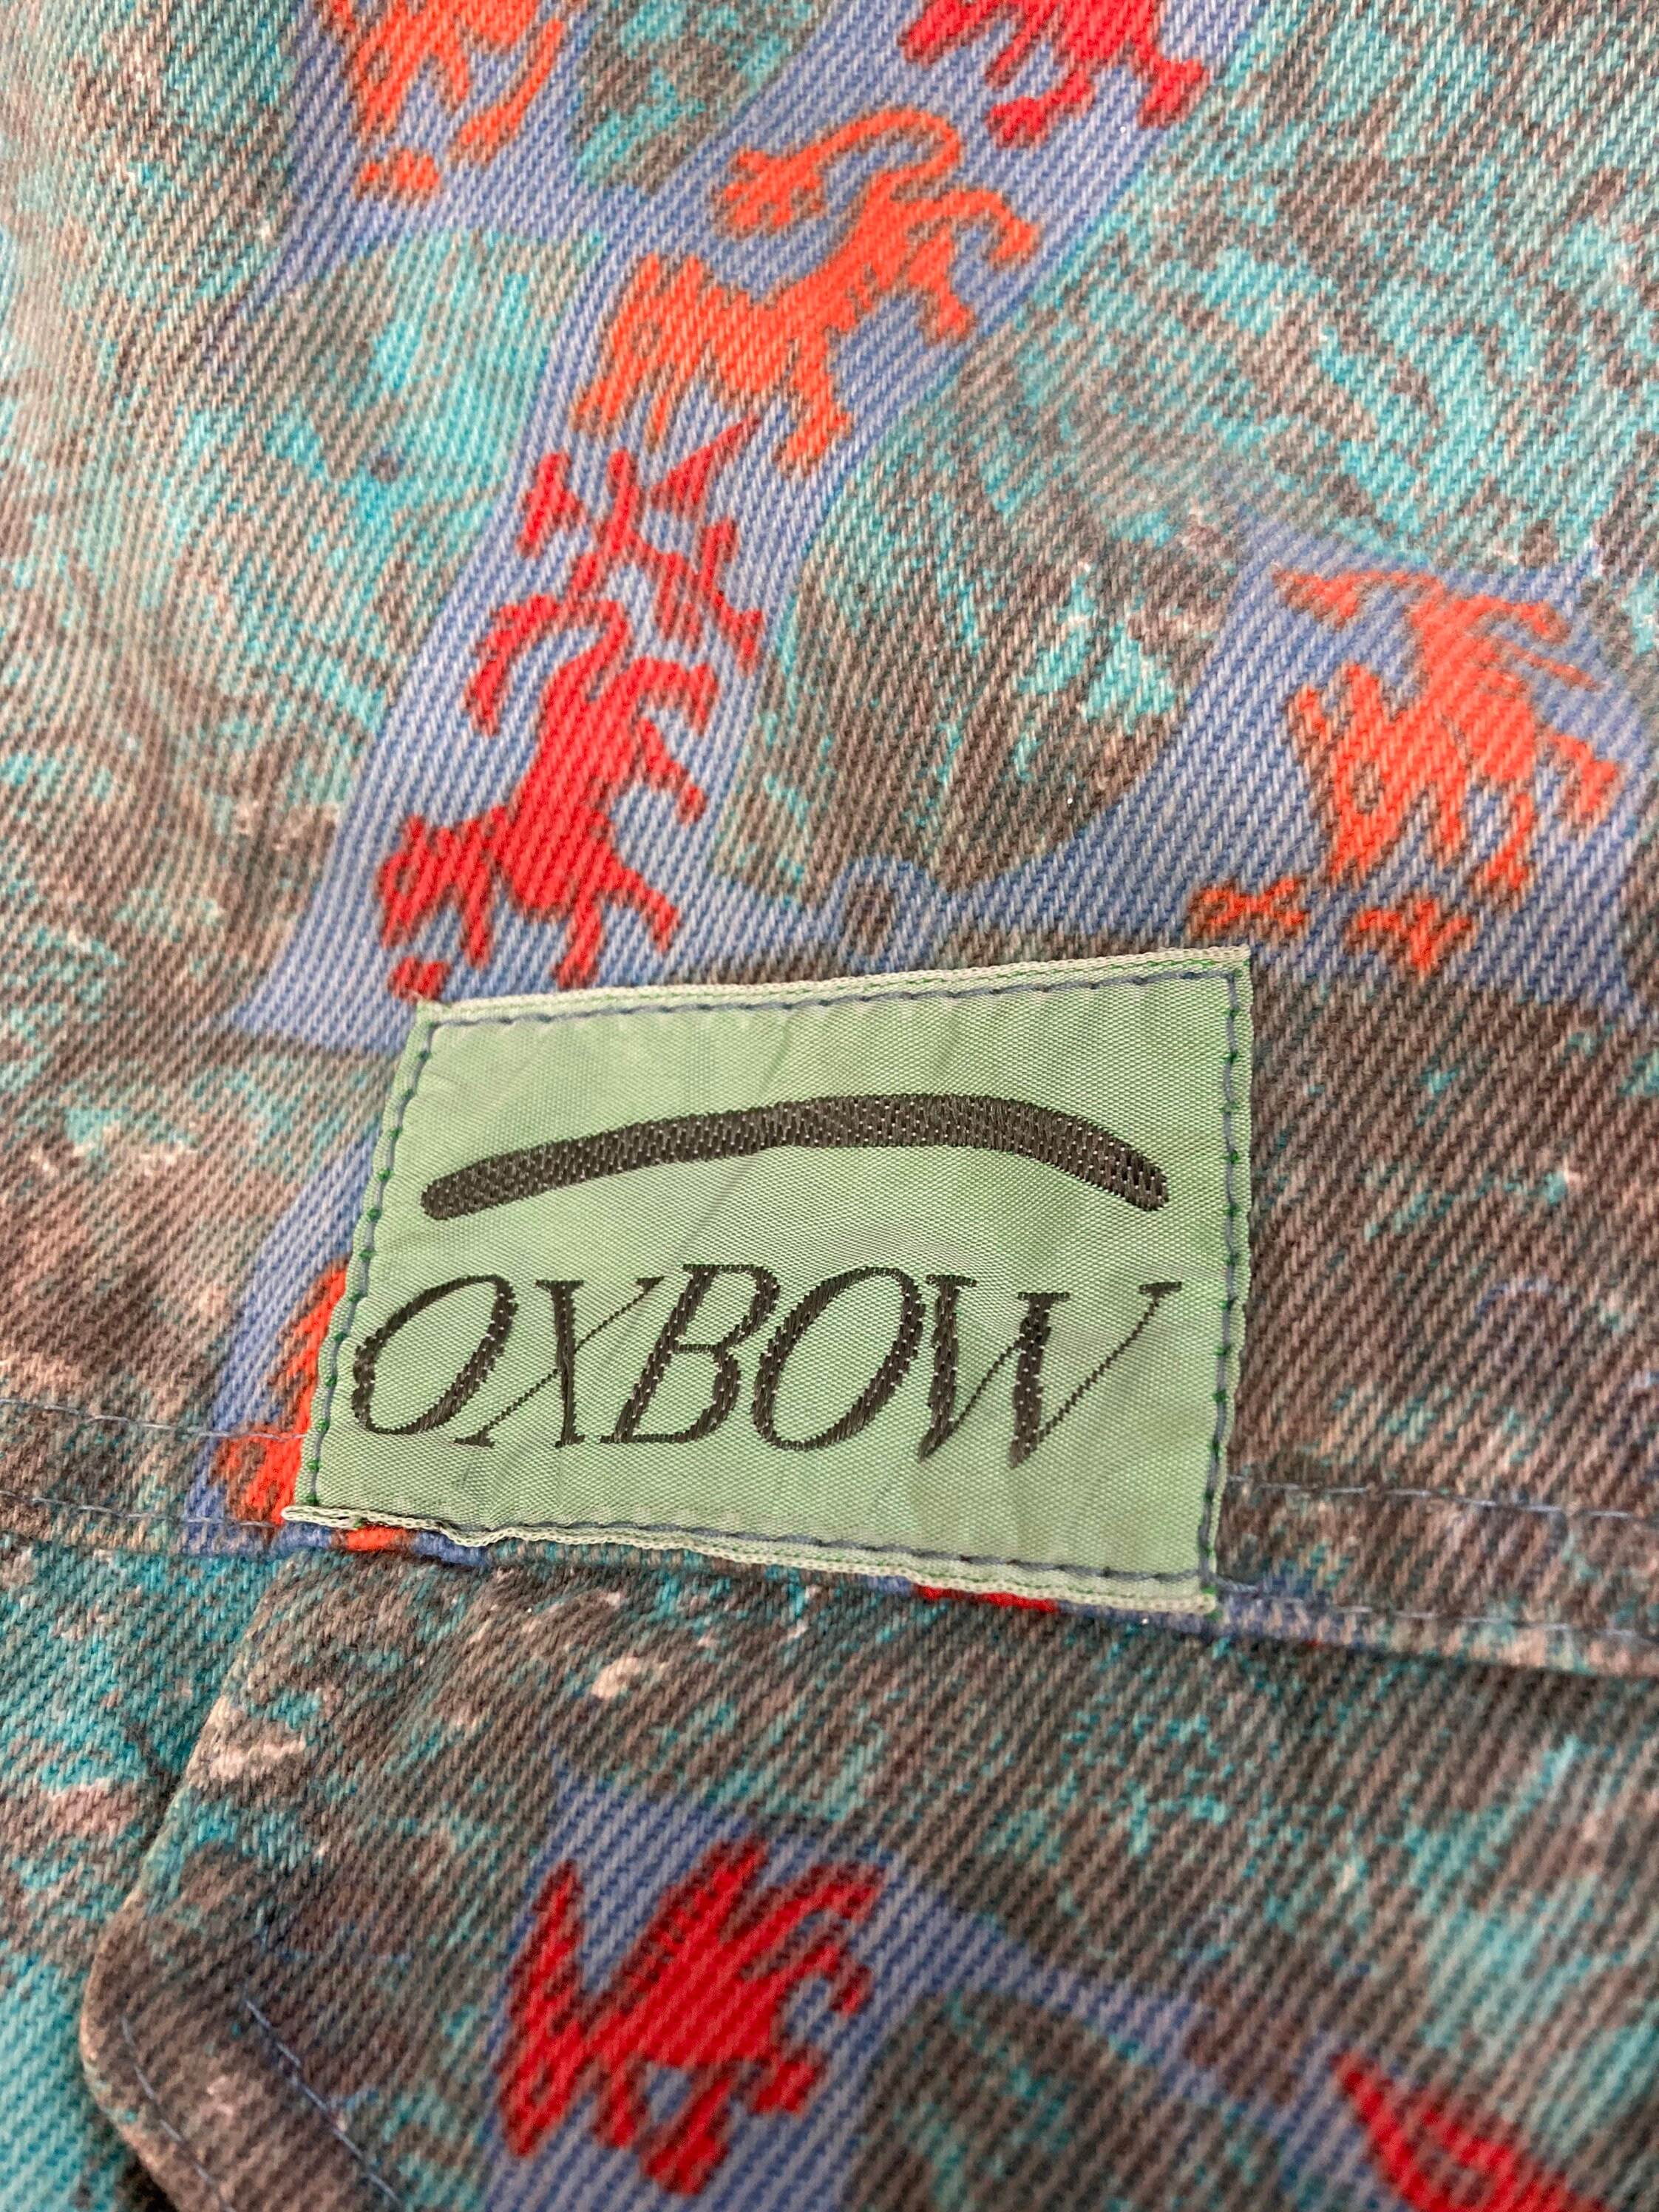 Vintage 90s Oxbow jean jacket with crazy print denim and - Etsy 日本